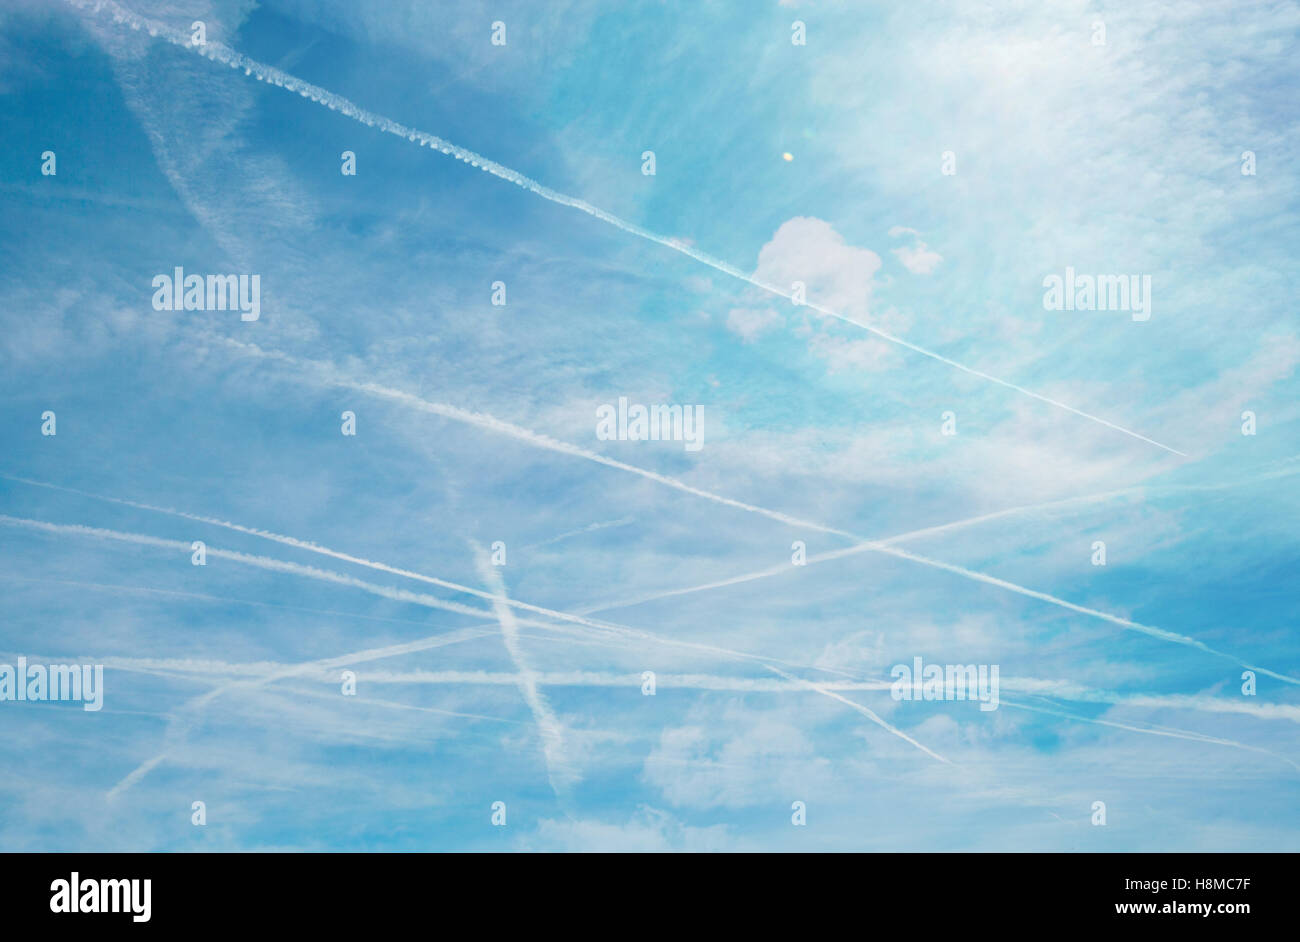 Cross contrails over blue sky background Stock Photo